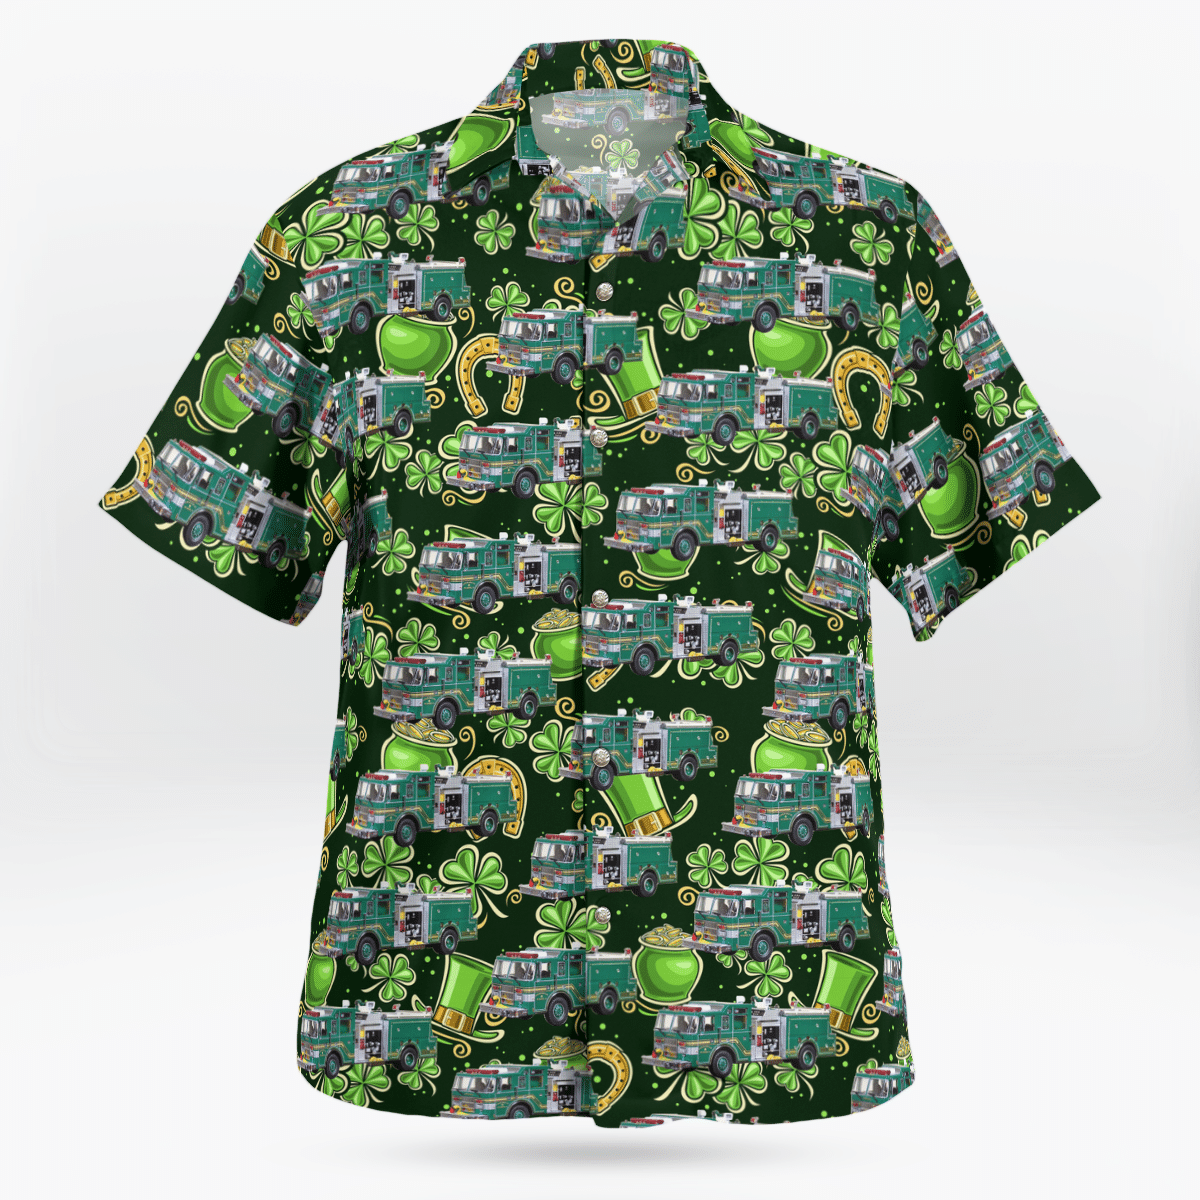 Hawaiian shirts never go out of style 188